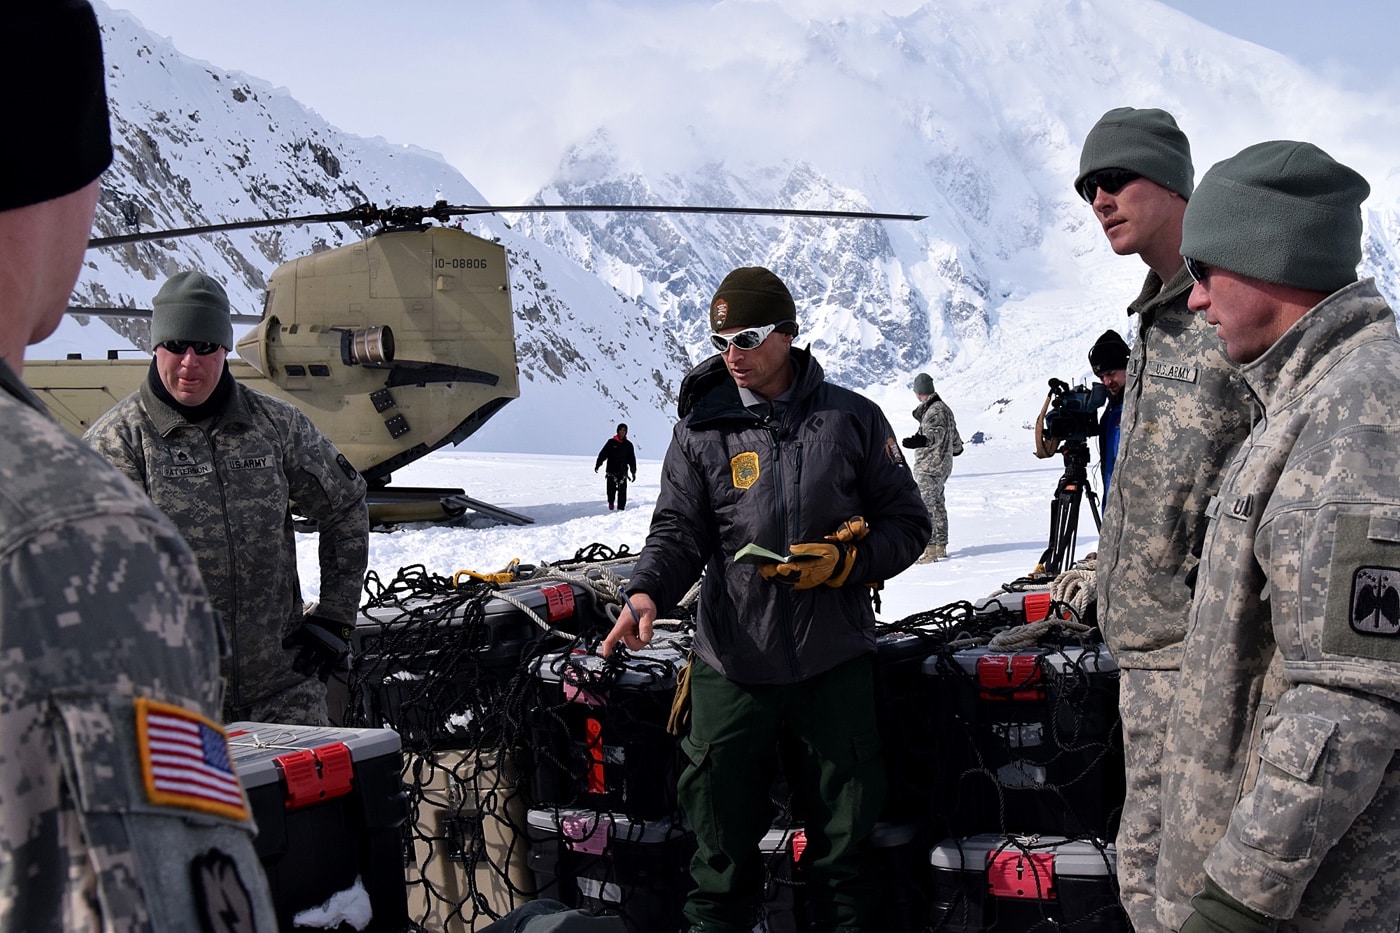 us army soldiers working with us park ranger for rescue operations